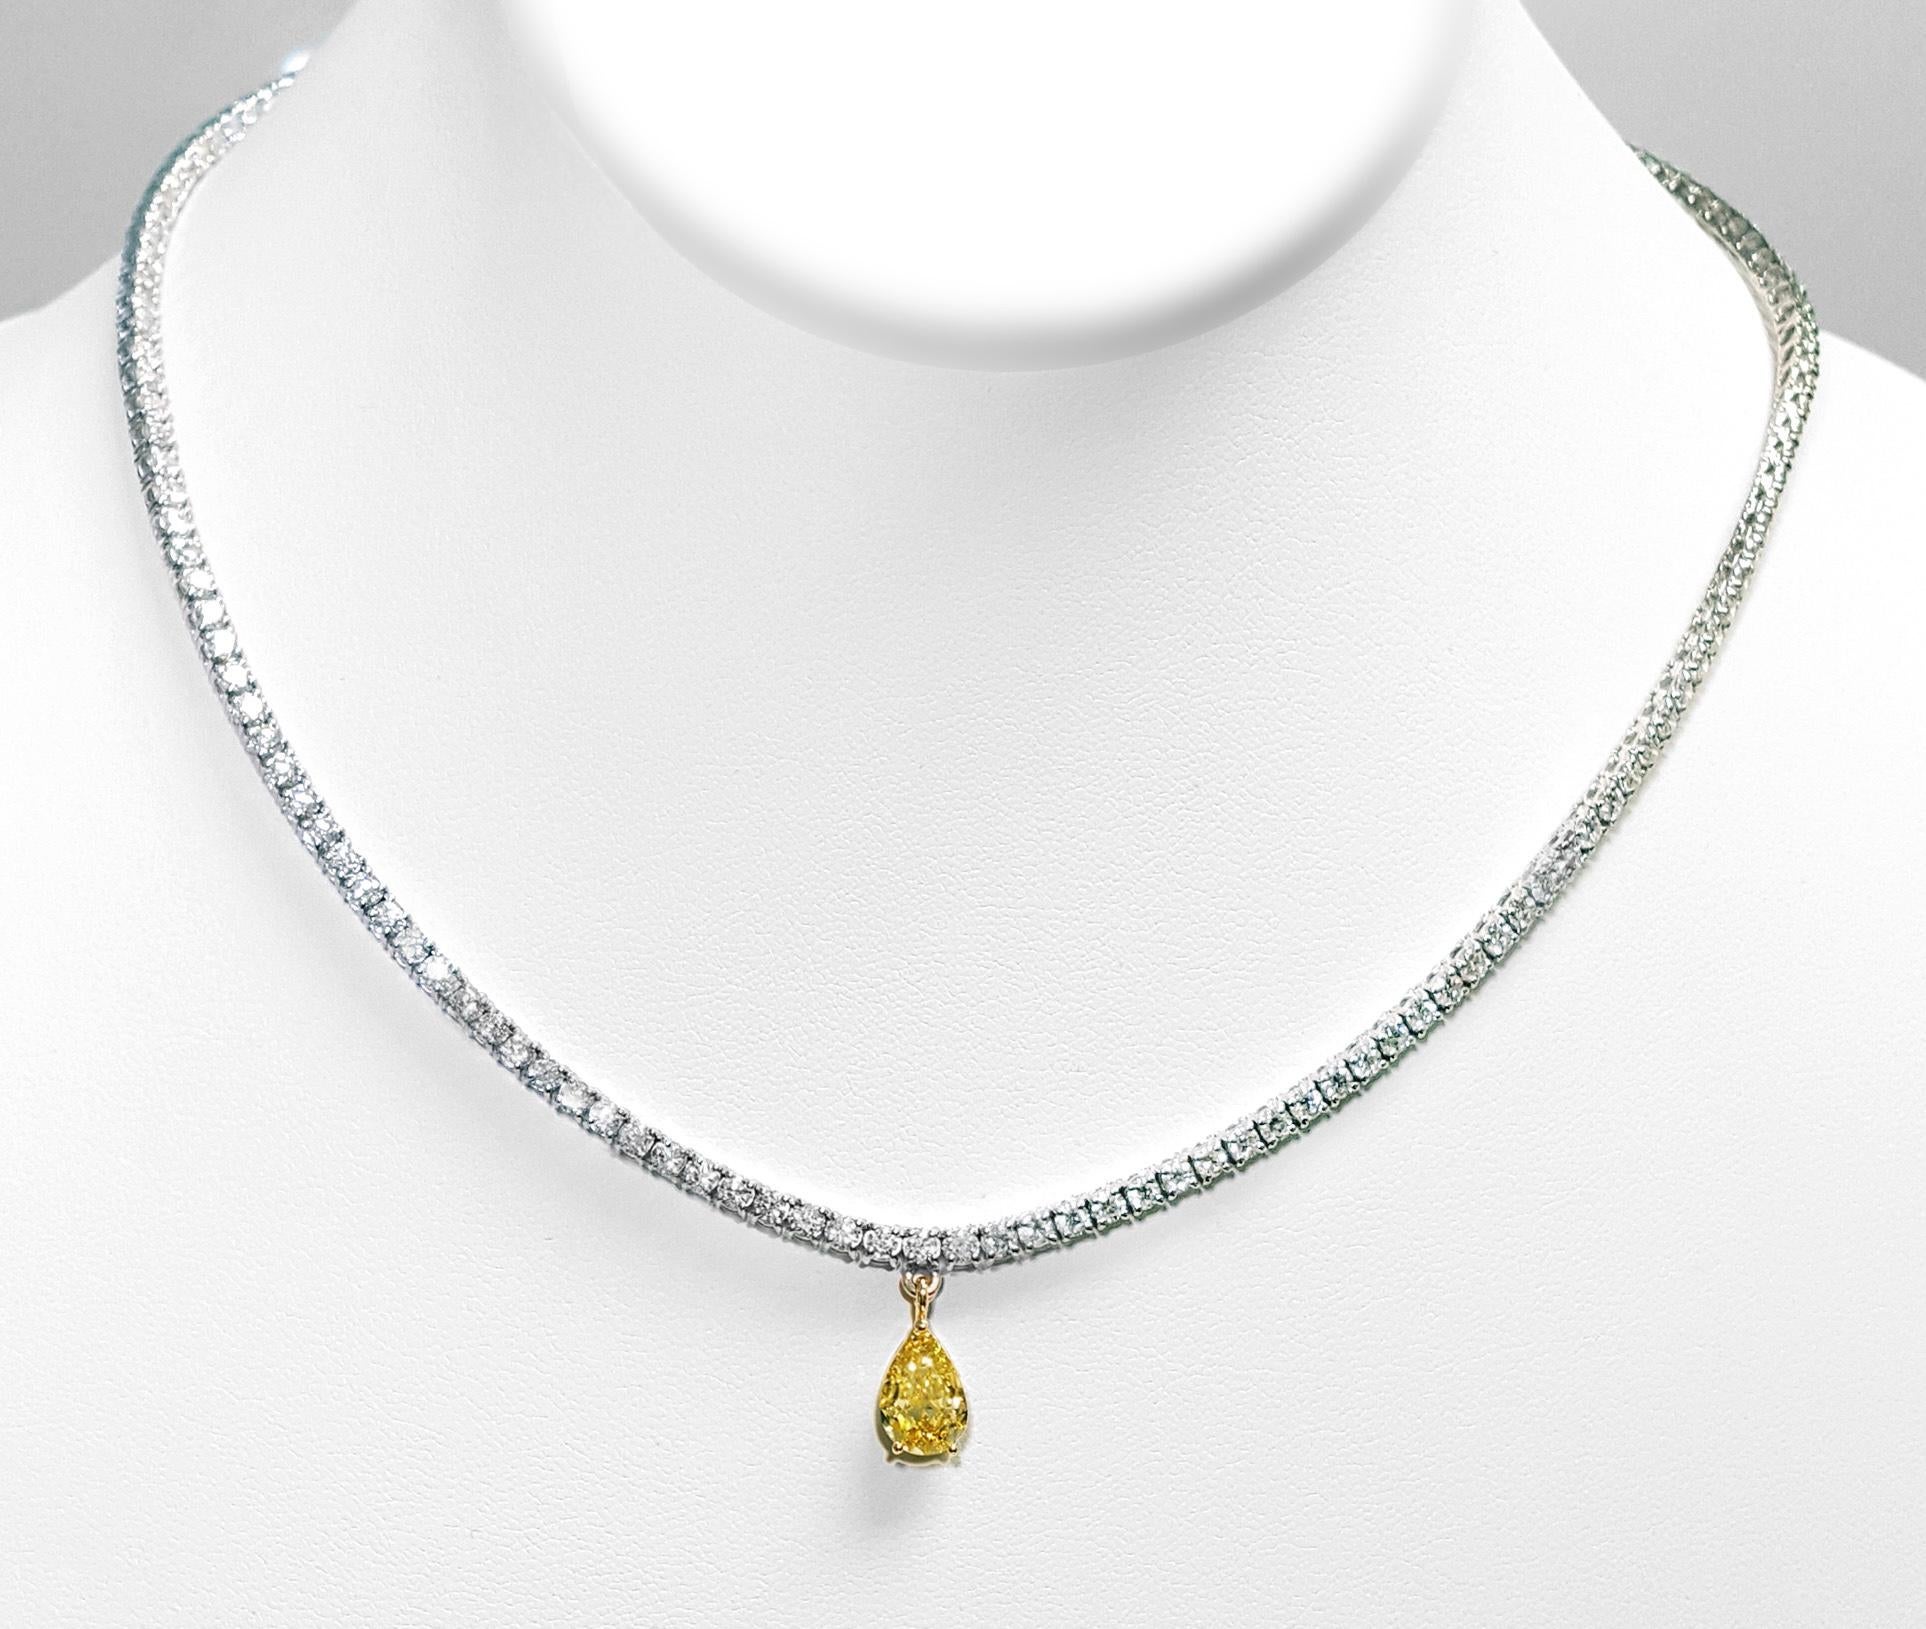 Exquisitely crafted with meticulous attention to detail, this classic 10.66-carat diamond tennis necklace features a distinctive touch: a 1.51-carat Fancy Intense Yellow pear-shaped diamond, GIA certified as VS2 clarity, gracefully suspended at its